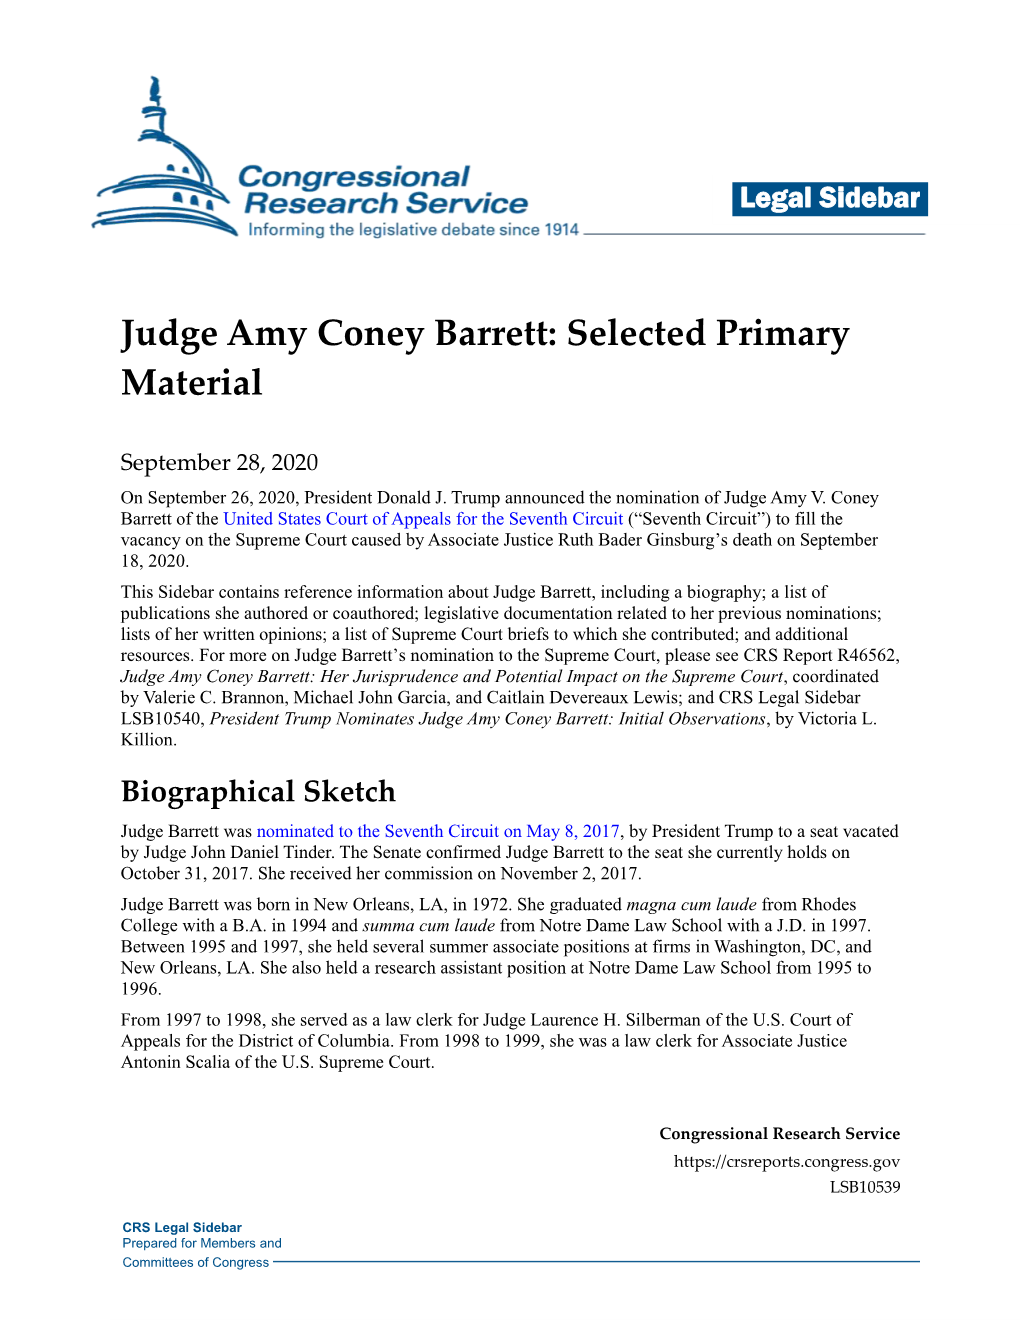 Judge Amy Coney Barrett: Selected Primary Material